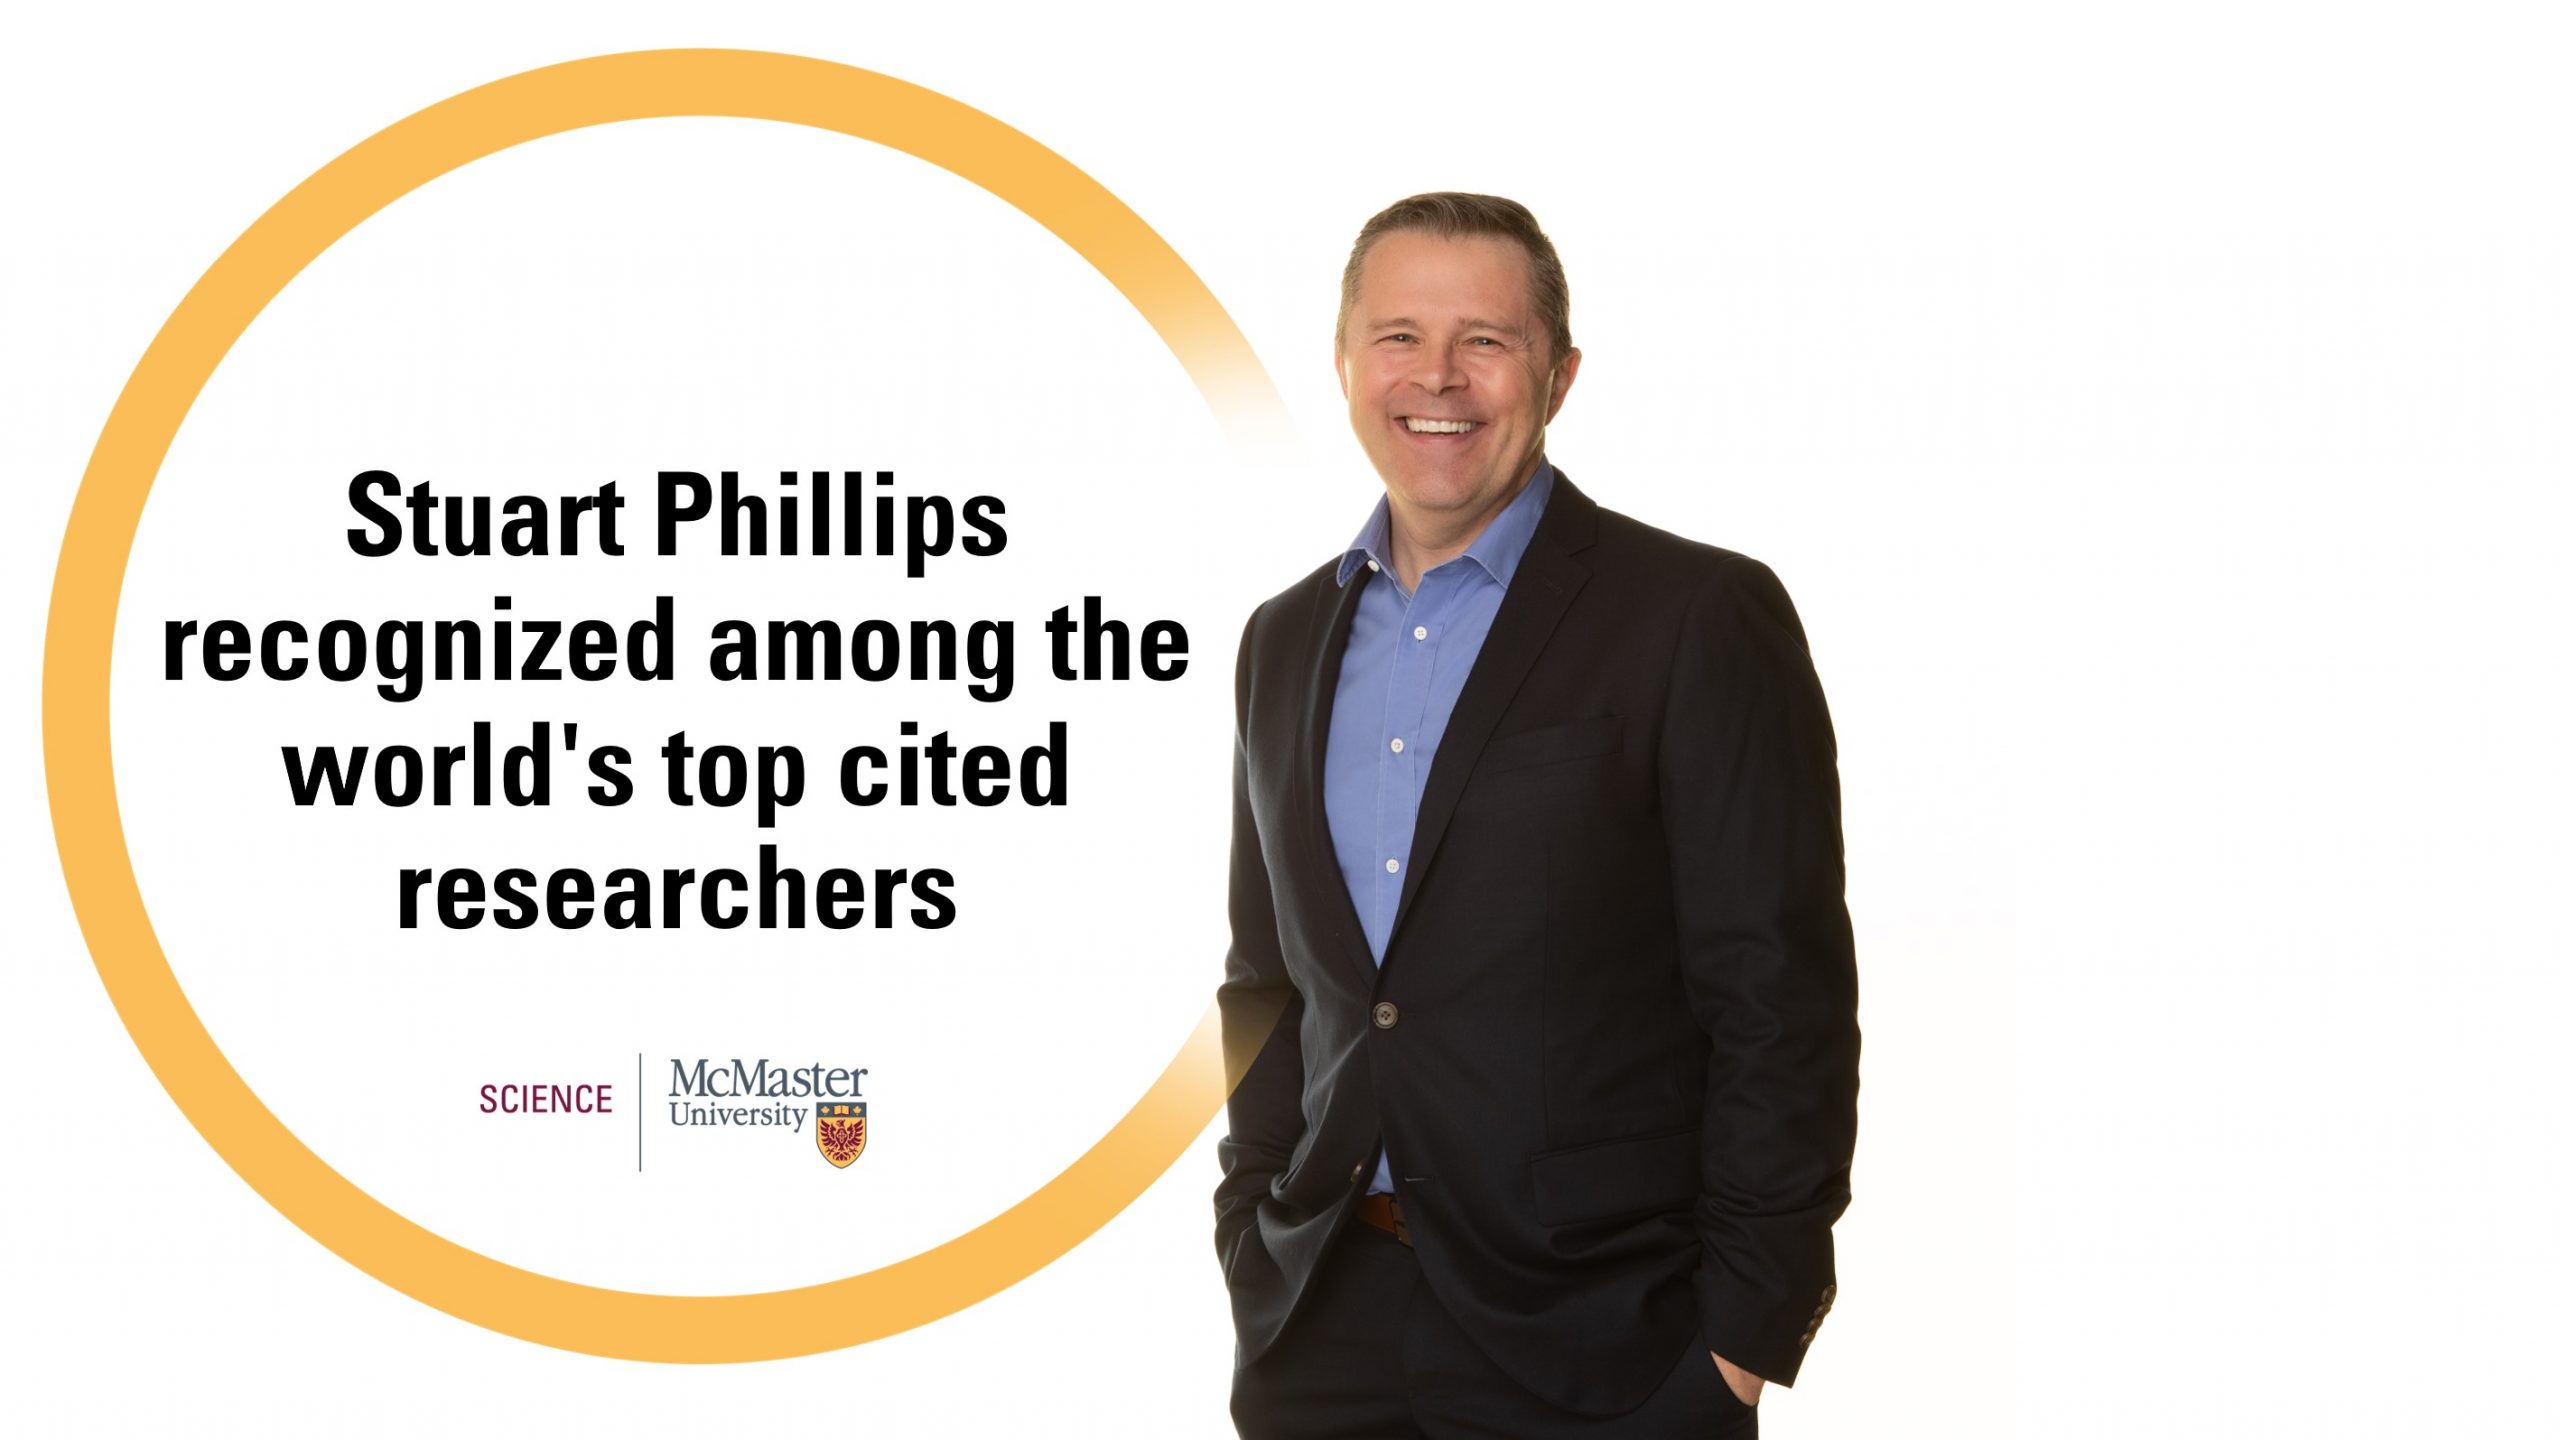 Stuart Phillips named one of the world's most cited researchers